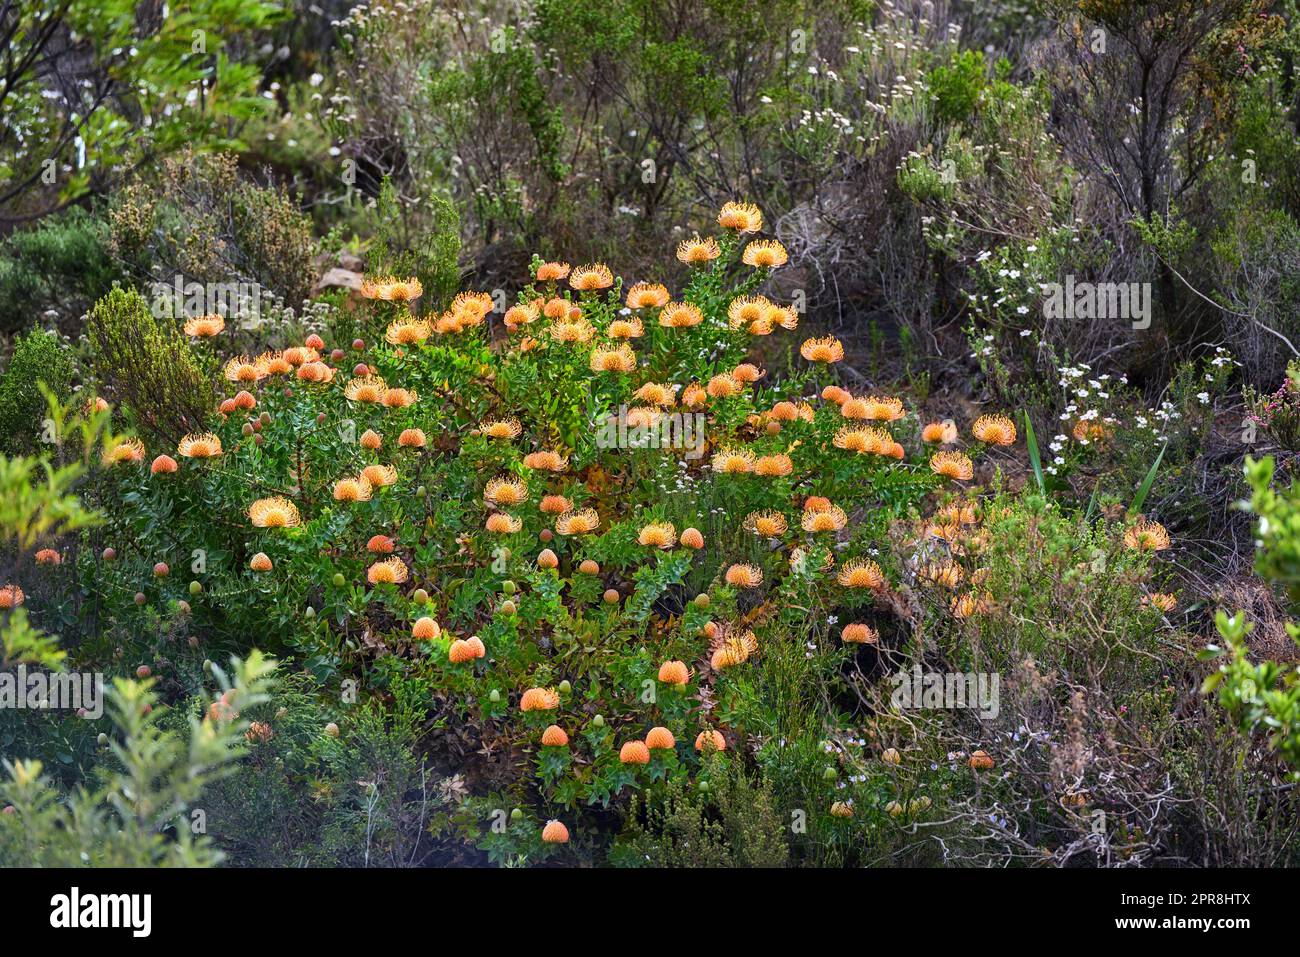 Above shot of orange protea flowers growing outside in their natural habitat. Plant life and vegetation growing and thriving on a mountainside in a lucious forest or woods as part of scenic nature Stock Photo